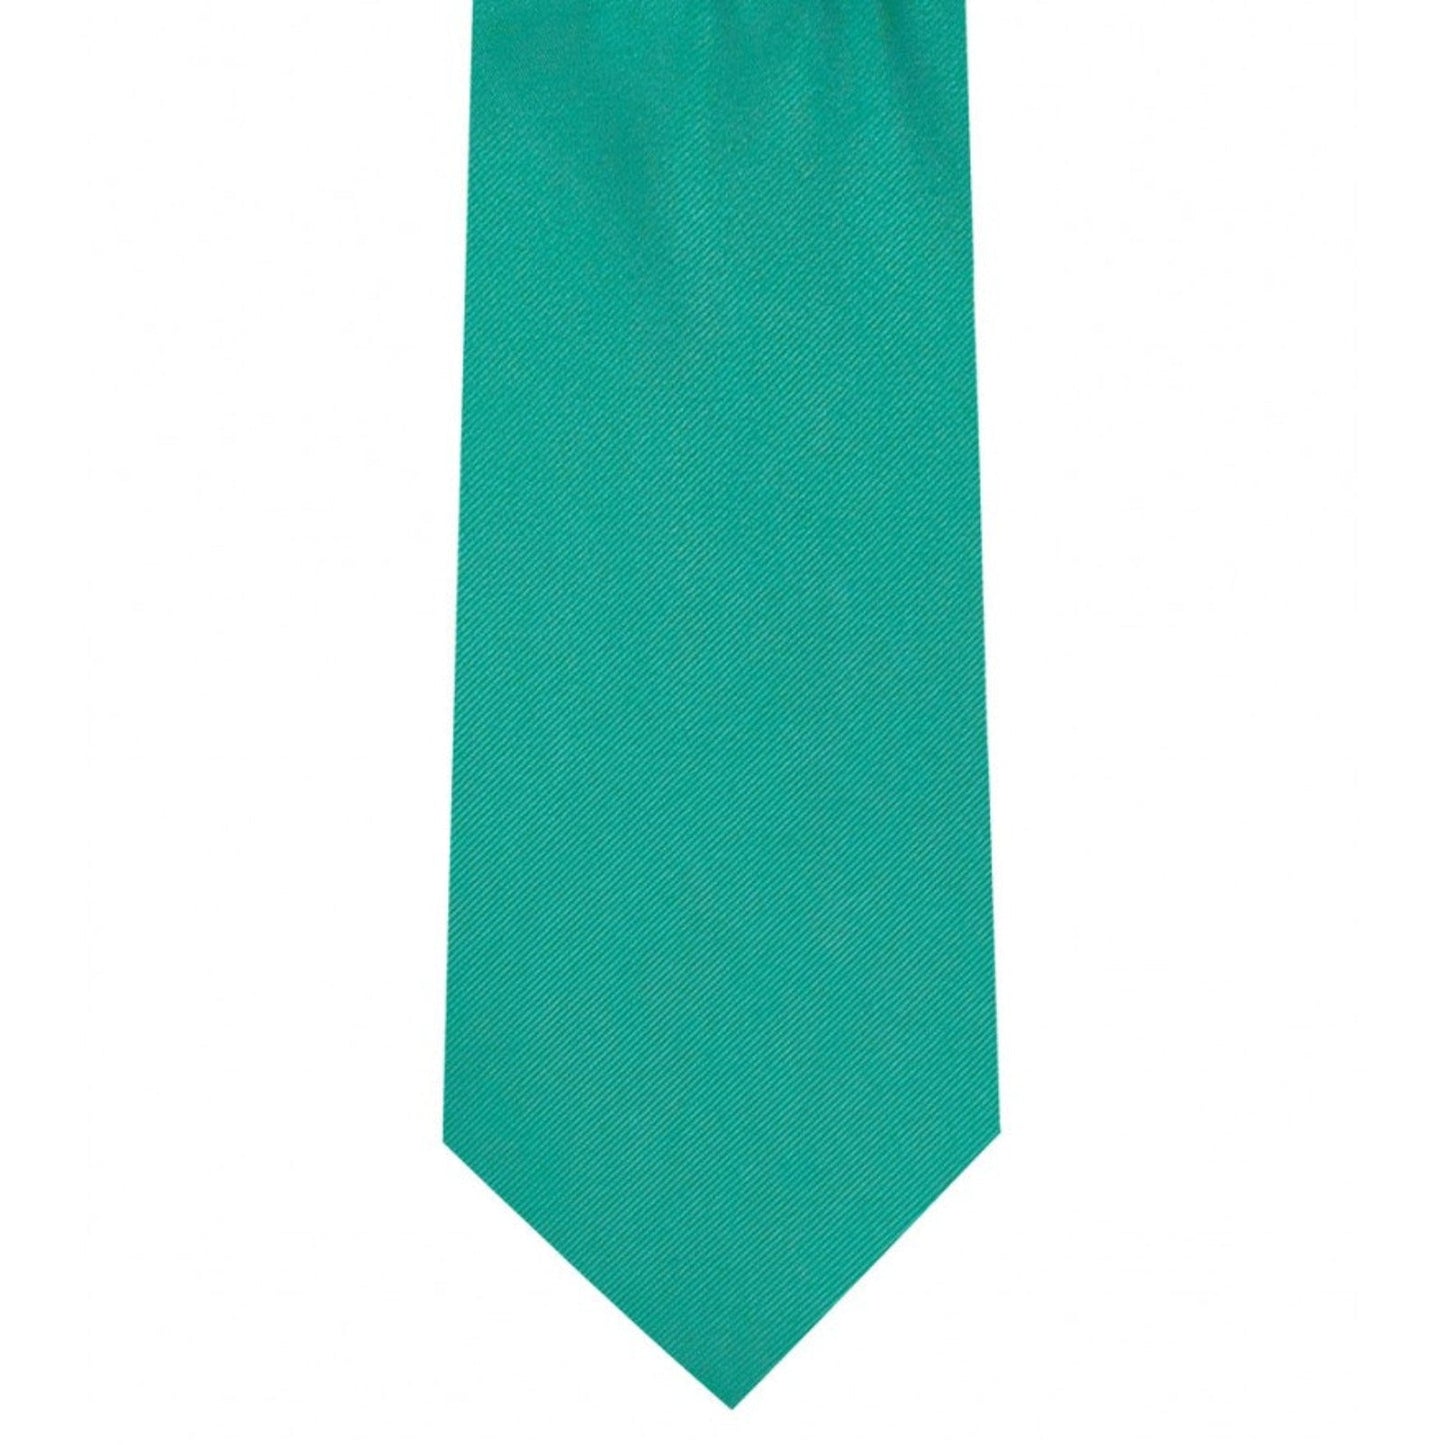 Classic Mermaid Green Tie Ultra Skinny tie width 2.25 inches With Matching Pocket Square | KCT Menswear